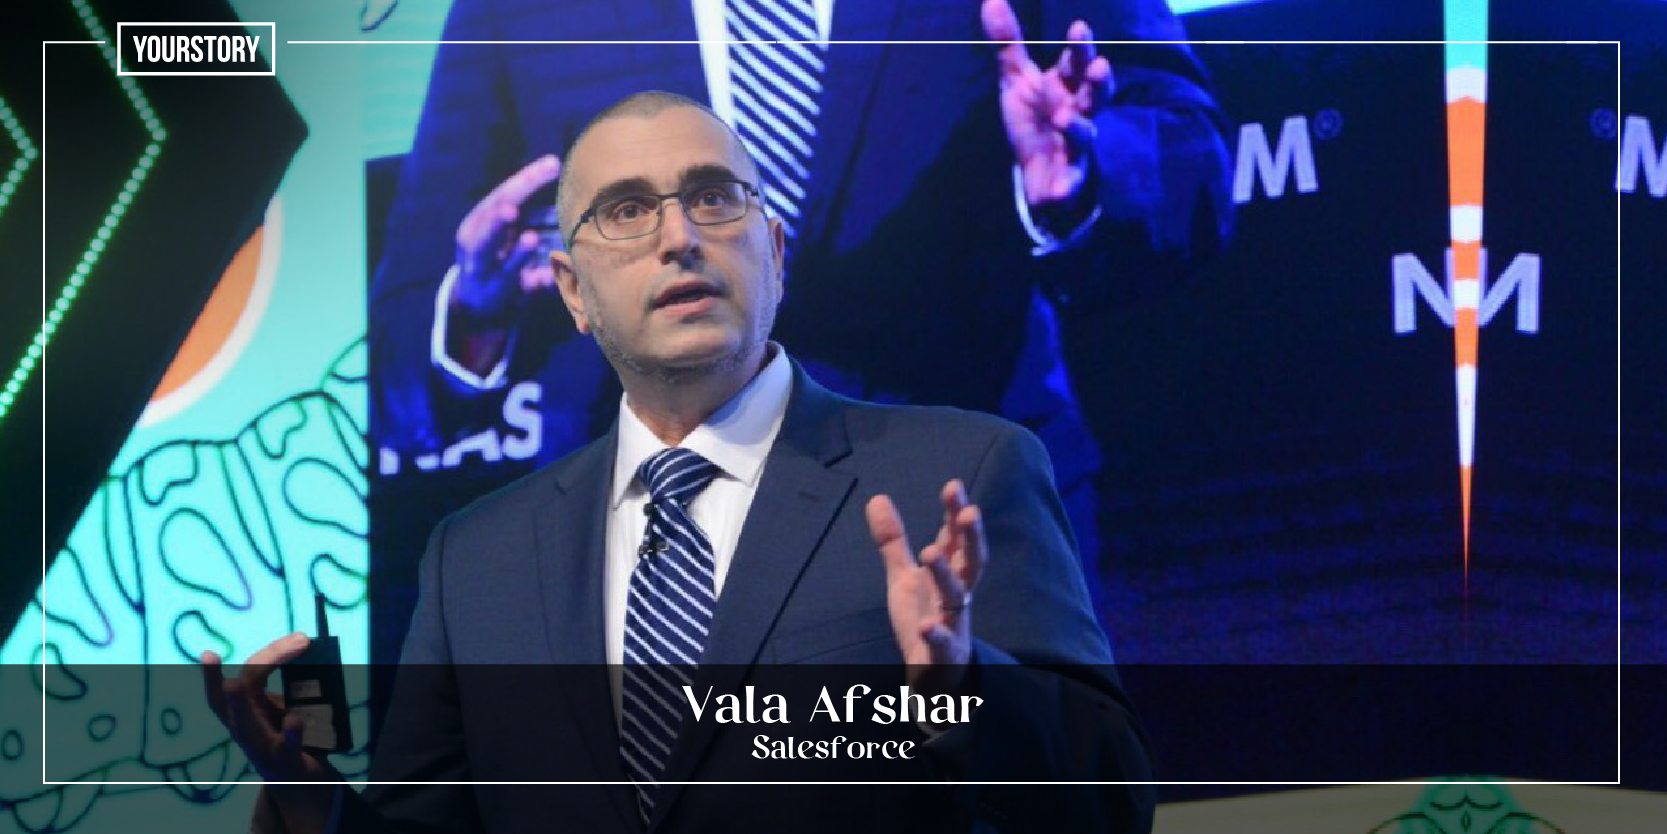 There’s a fine line between inspiring and manipulating: Vala Afshar on the pursuit of social business excellence